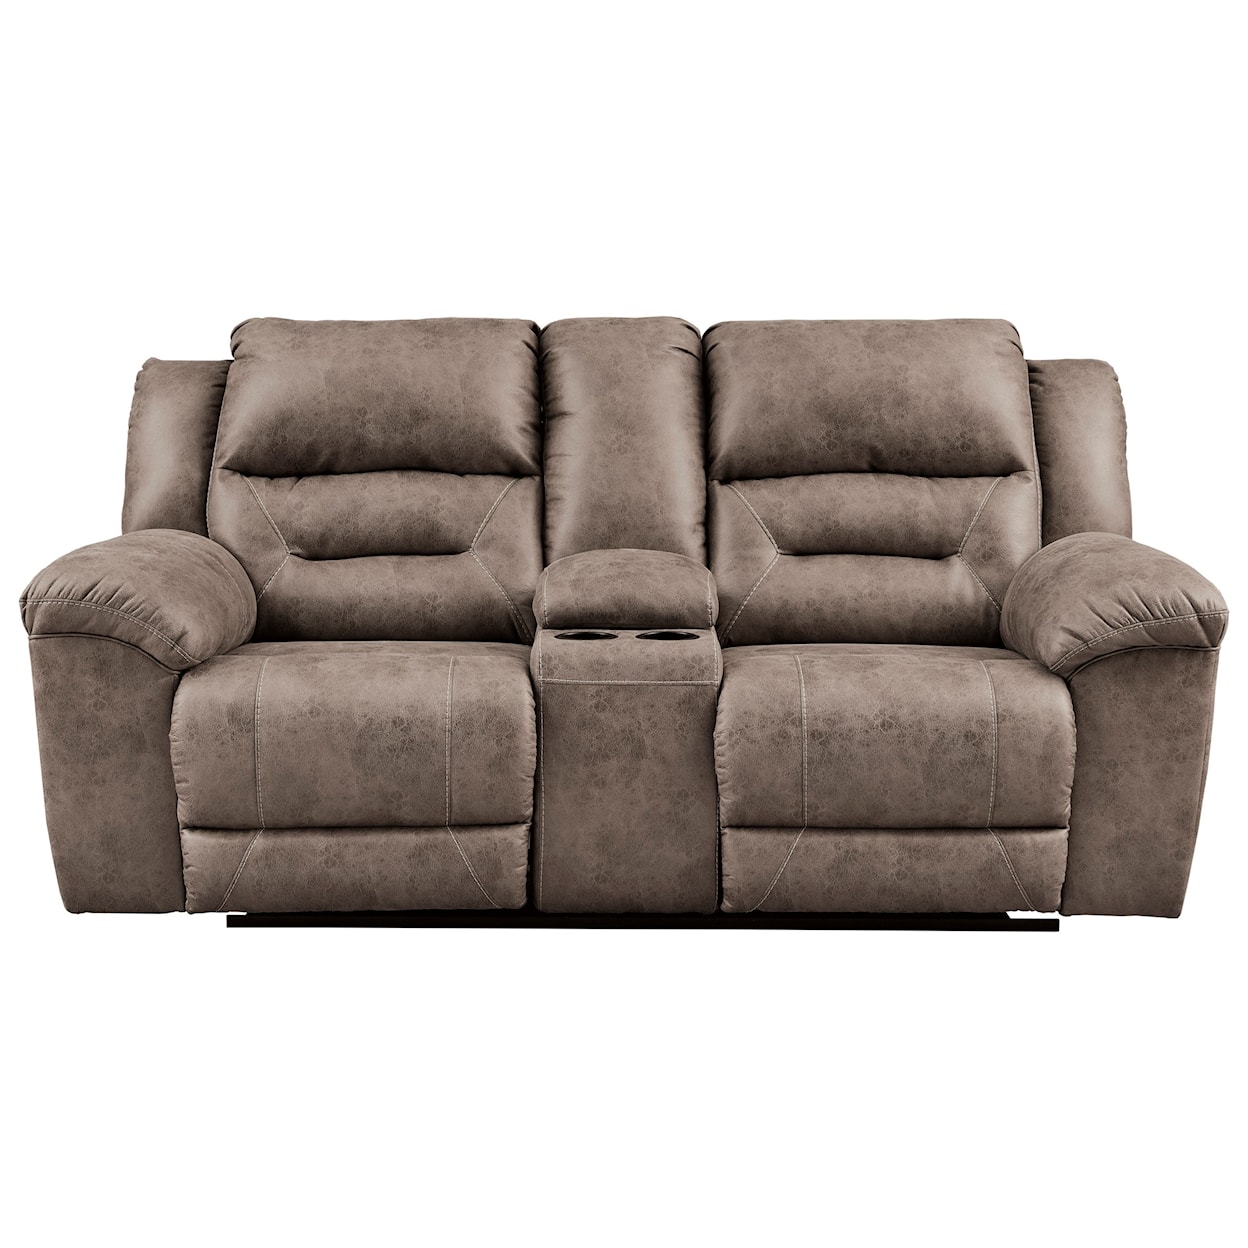 Benchcraft Stoneland Double Recl Power Loveseat w/ Console